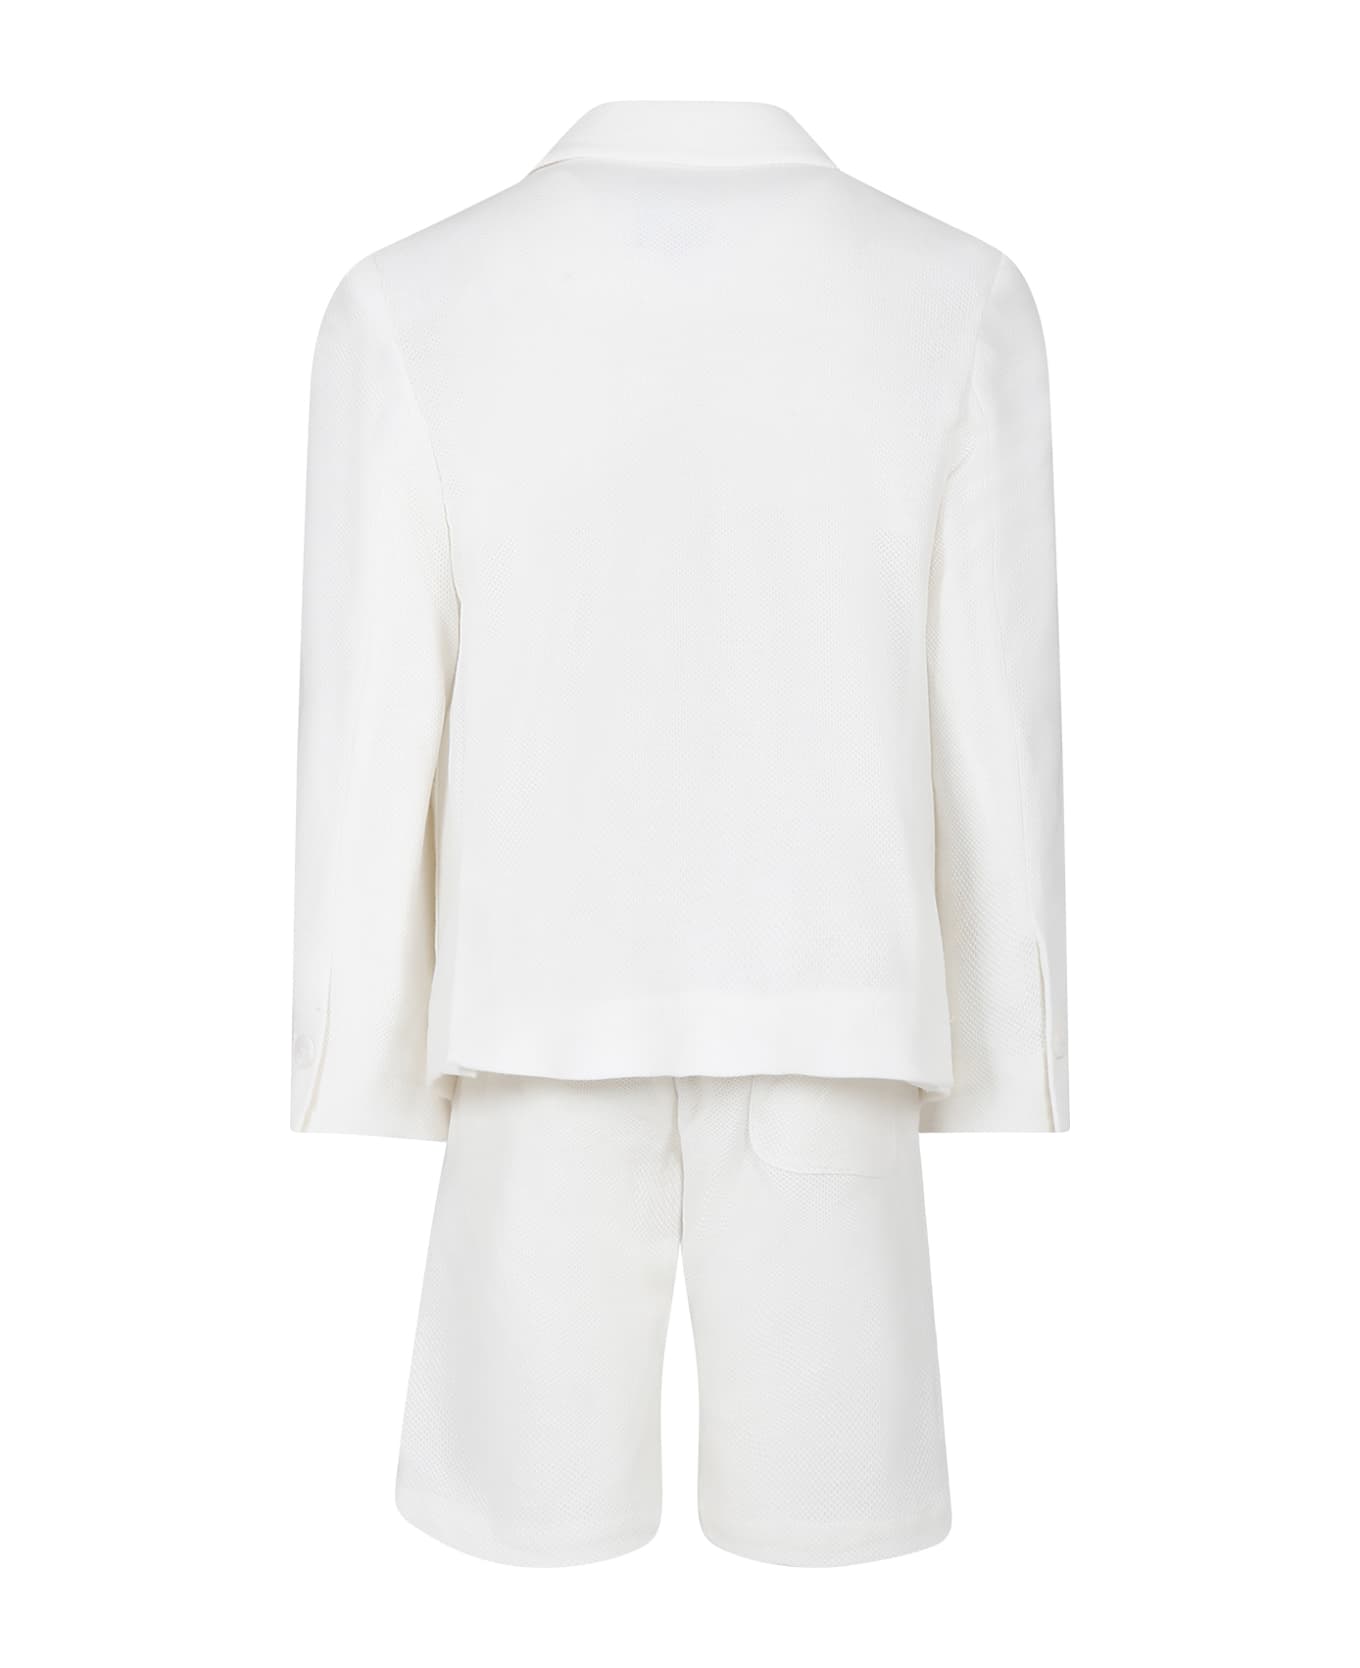 Fay Ivory Suit For Boy With Logo - Ivory